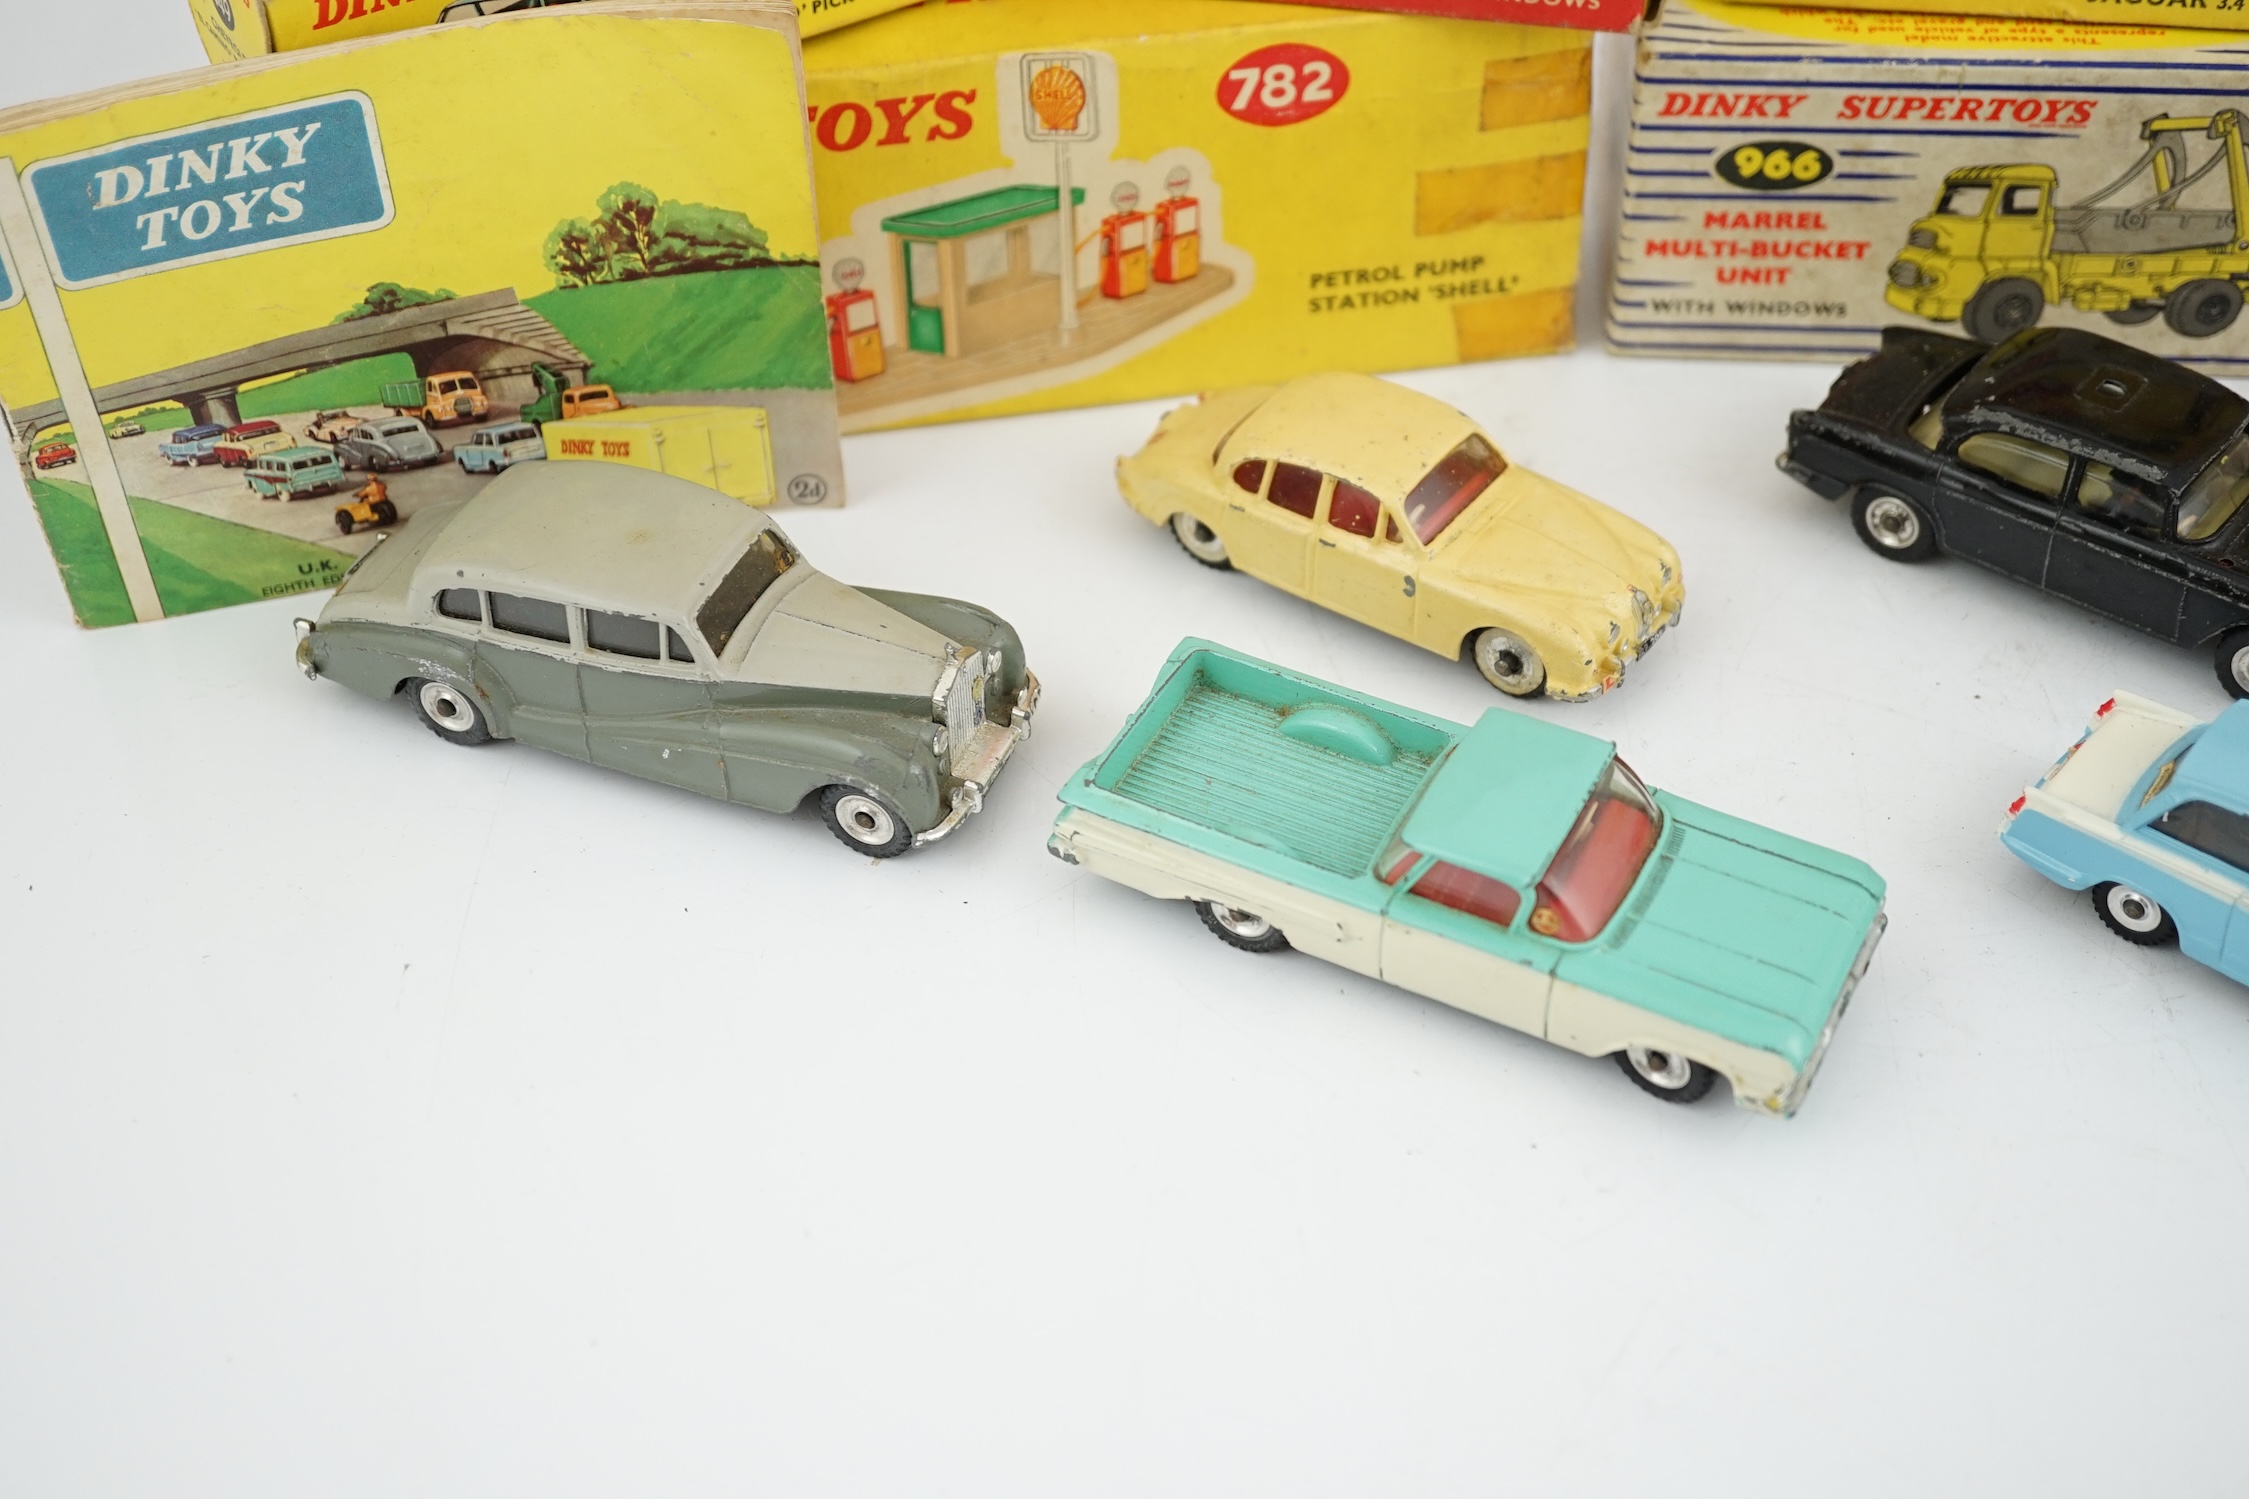 Eleven boxed Dinky Toys